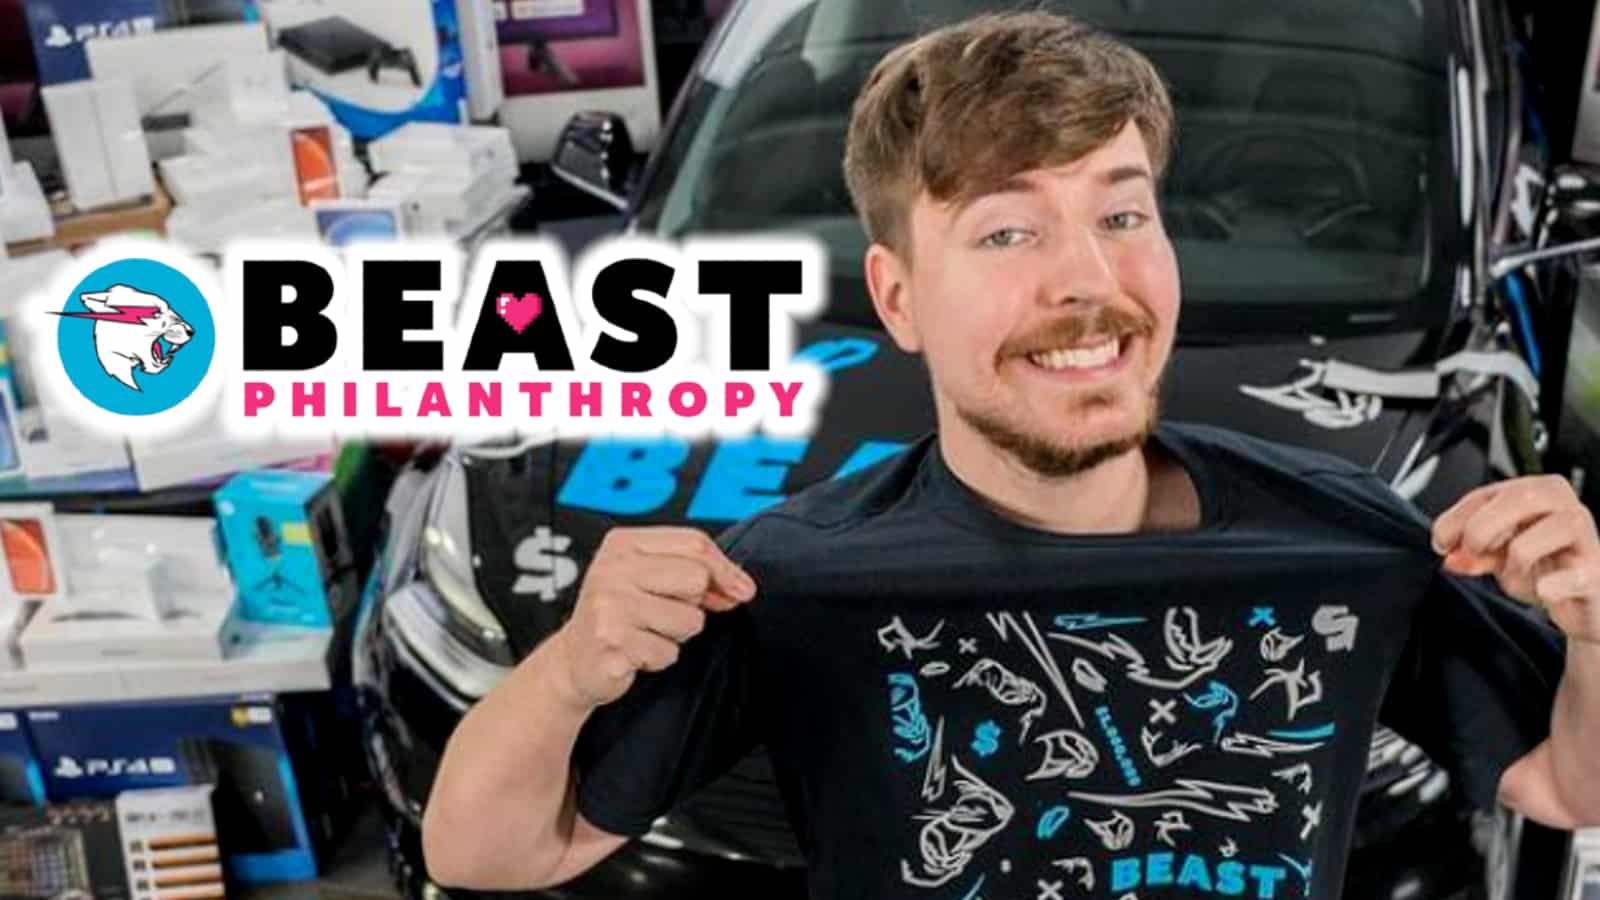 MrBeast announces plan to donate 10 million meals a month with philanthropy channel - Dexerto